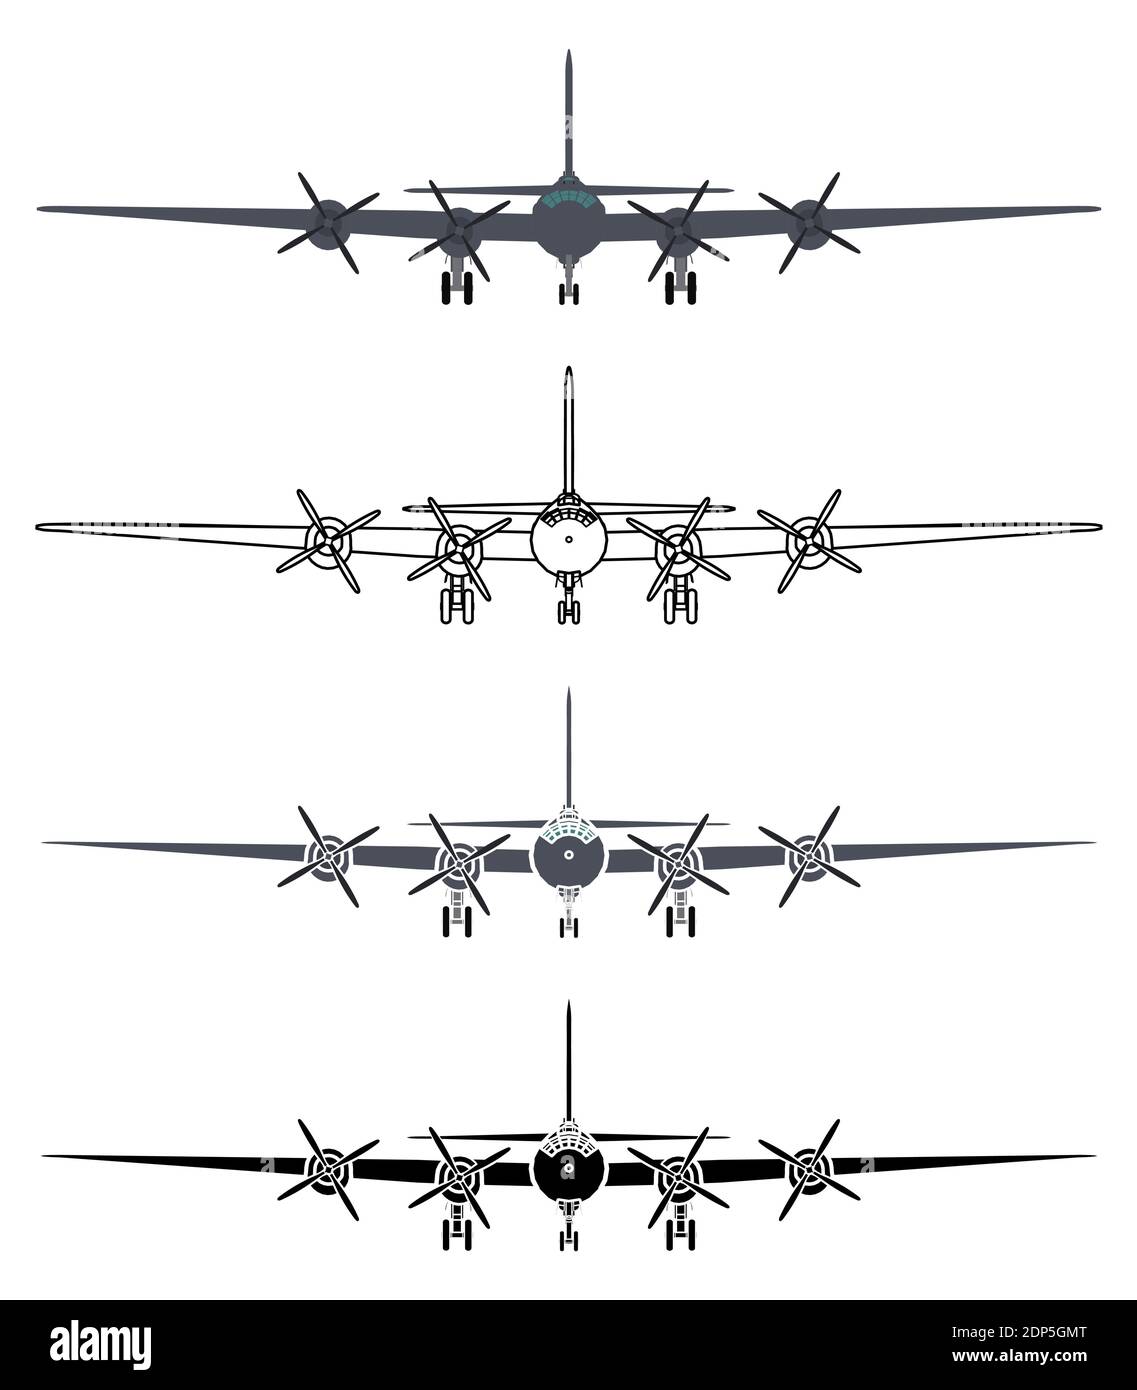 B29 superfortress airplane, front view. Stock Vector